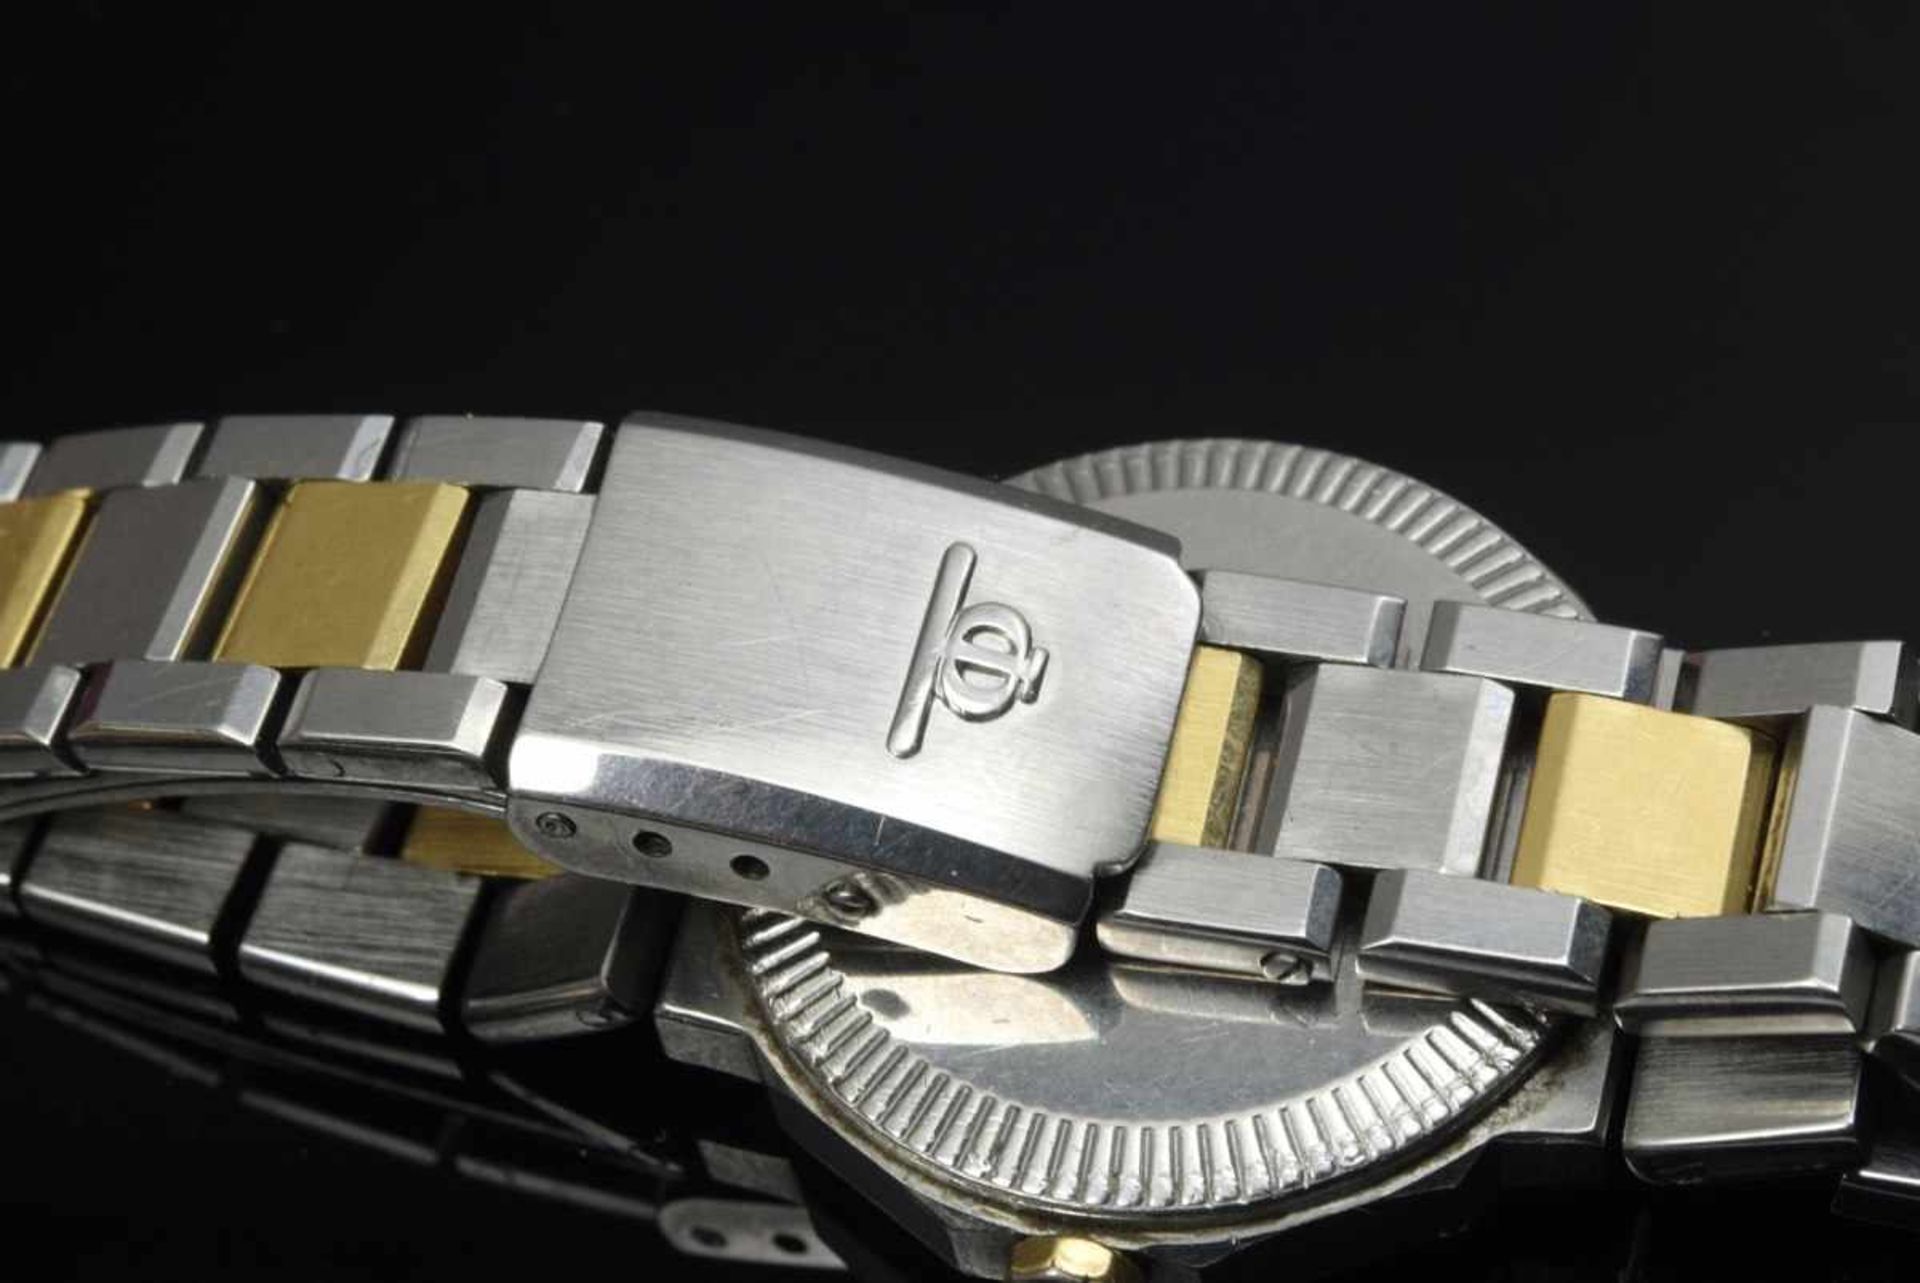 Baume & Mercier "Riviera" ladies' watch, stainless steel/gold, quartz movement, central second hand, - Image 3 of 4